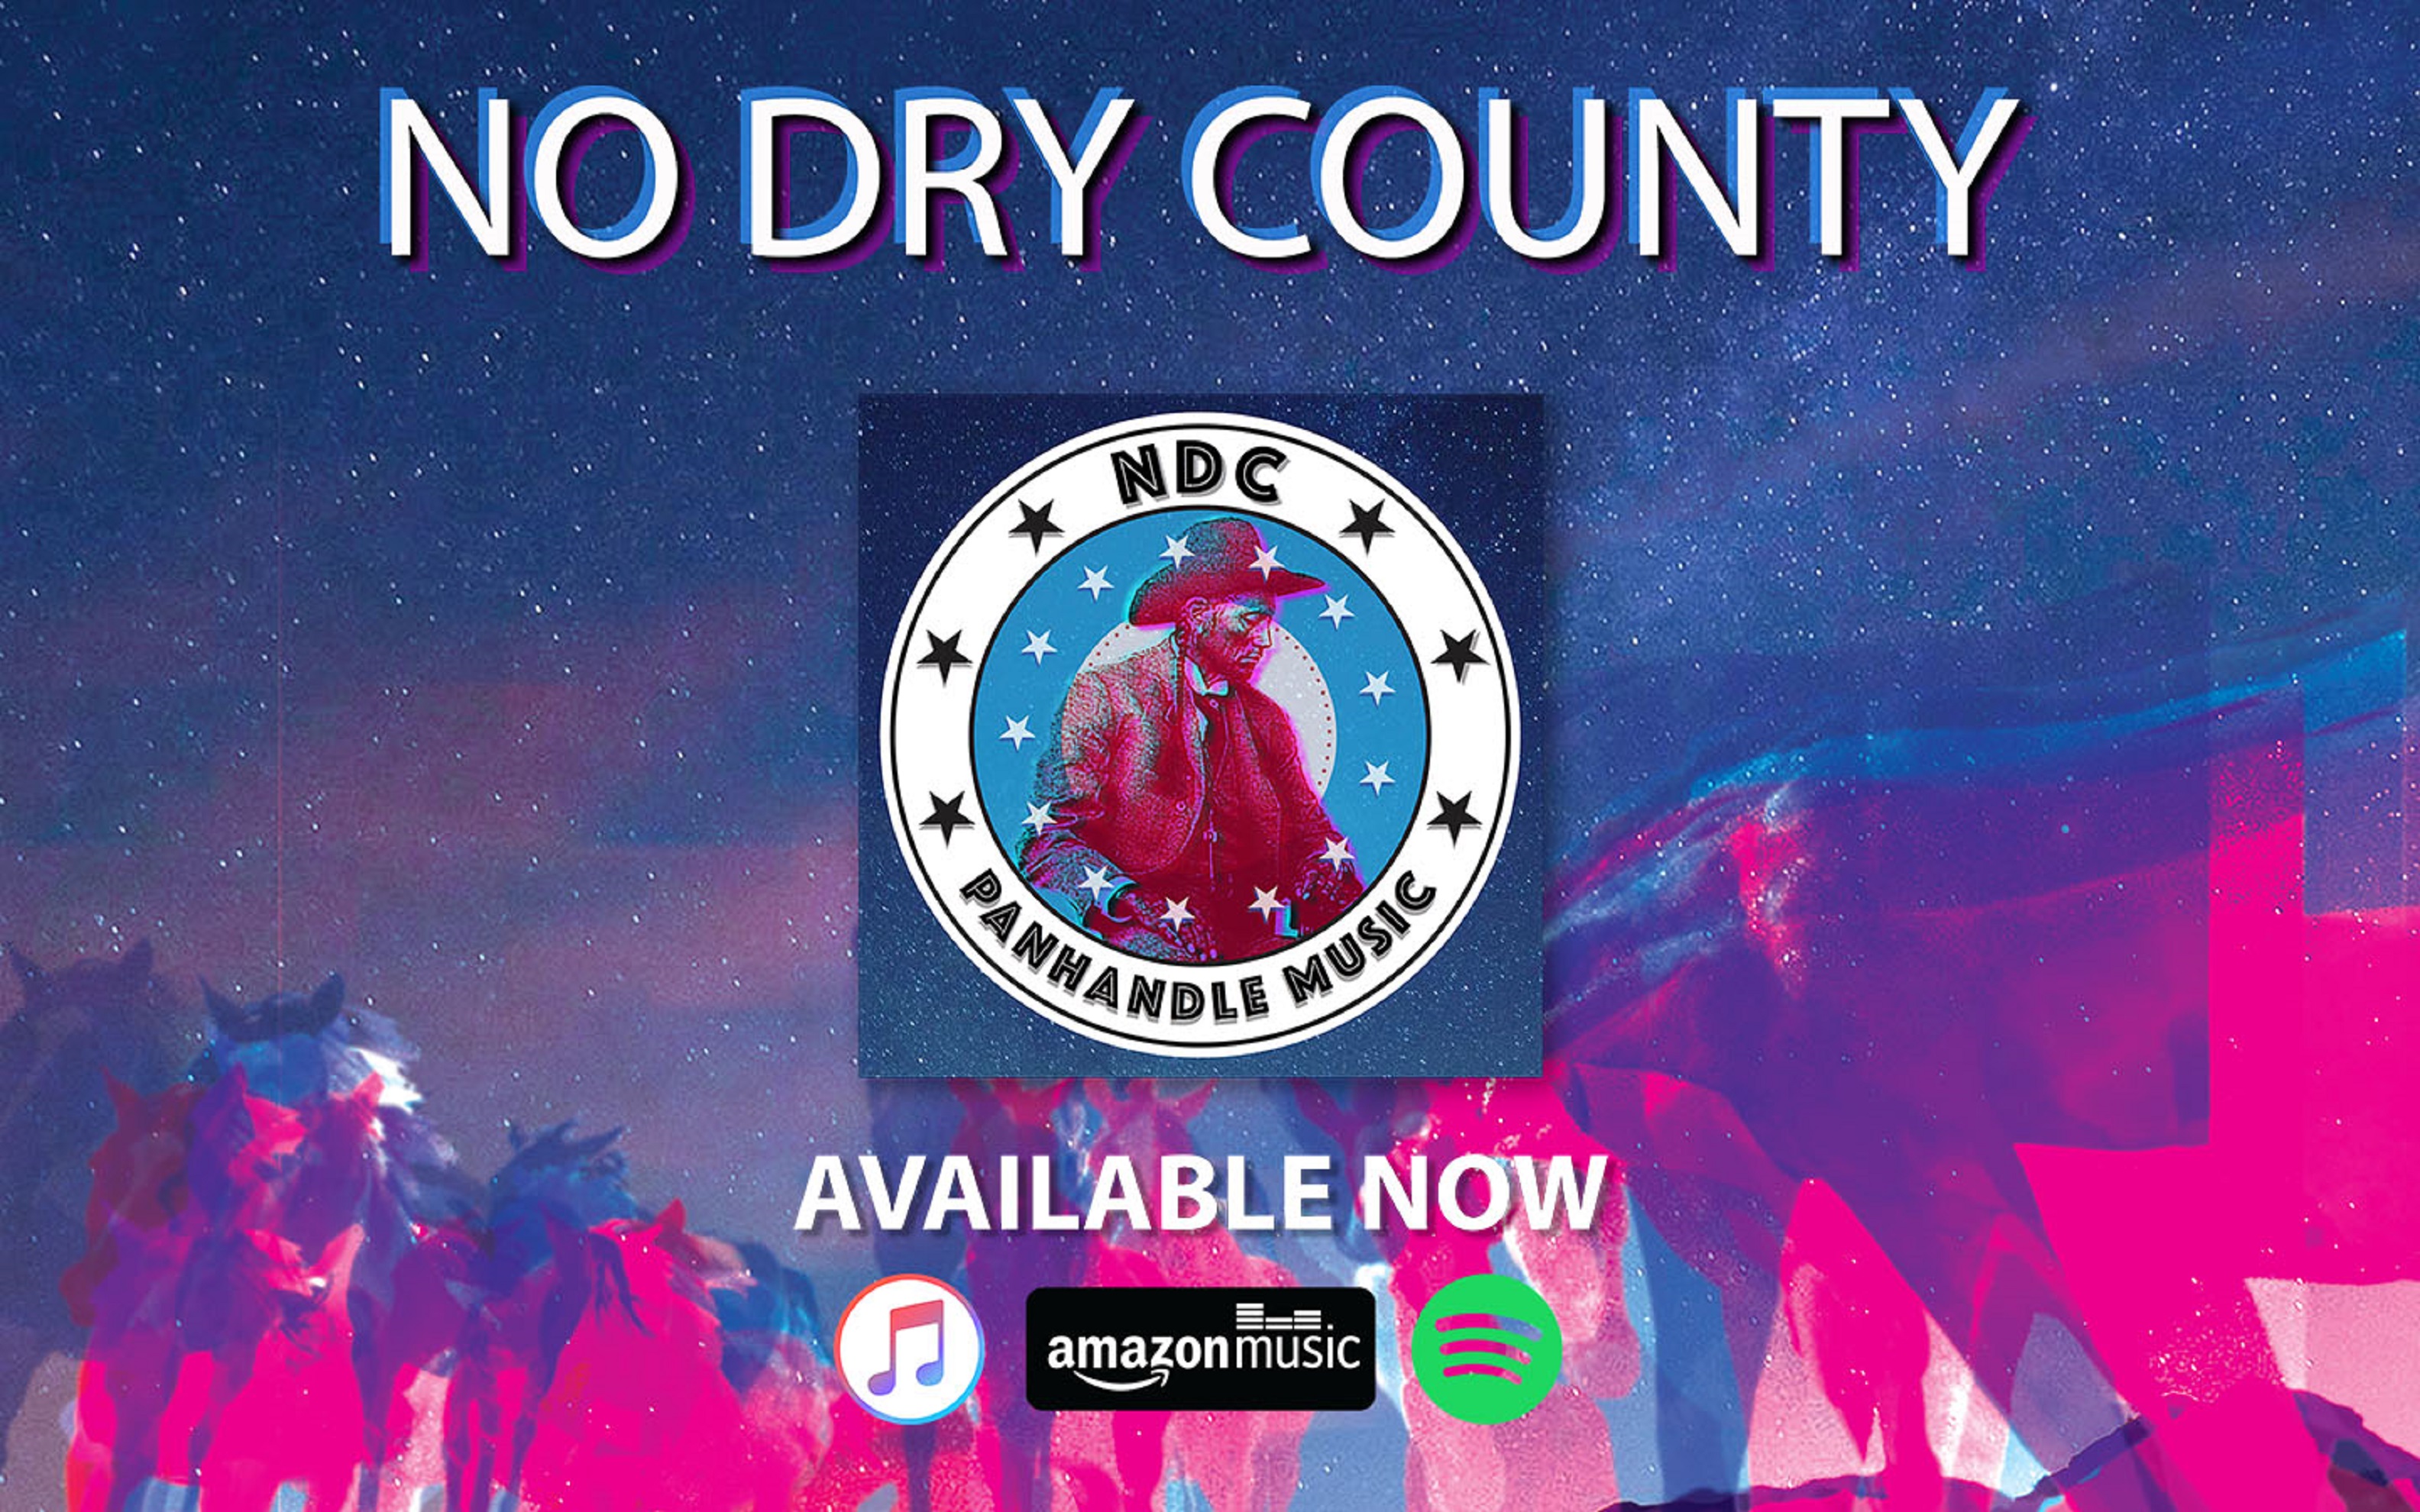 No Dry County Make Waves with New Album